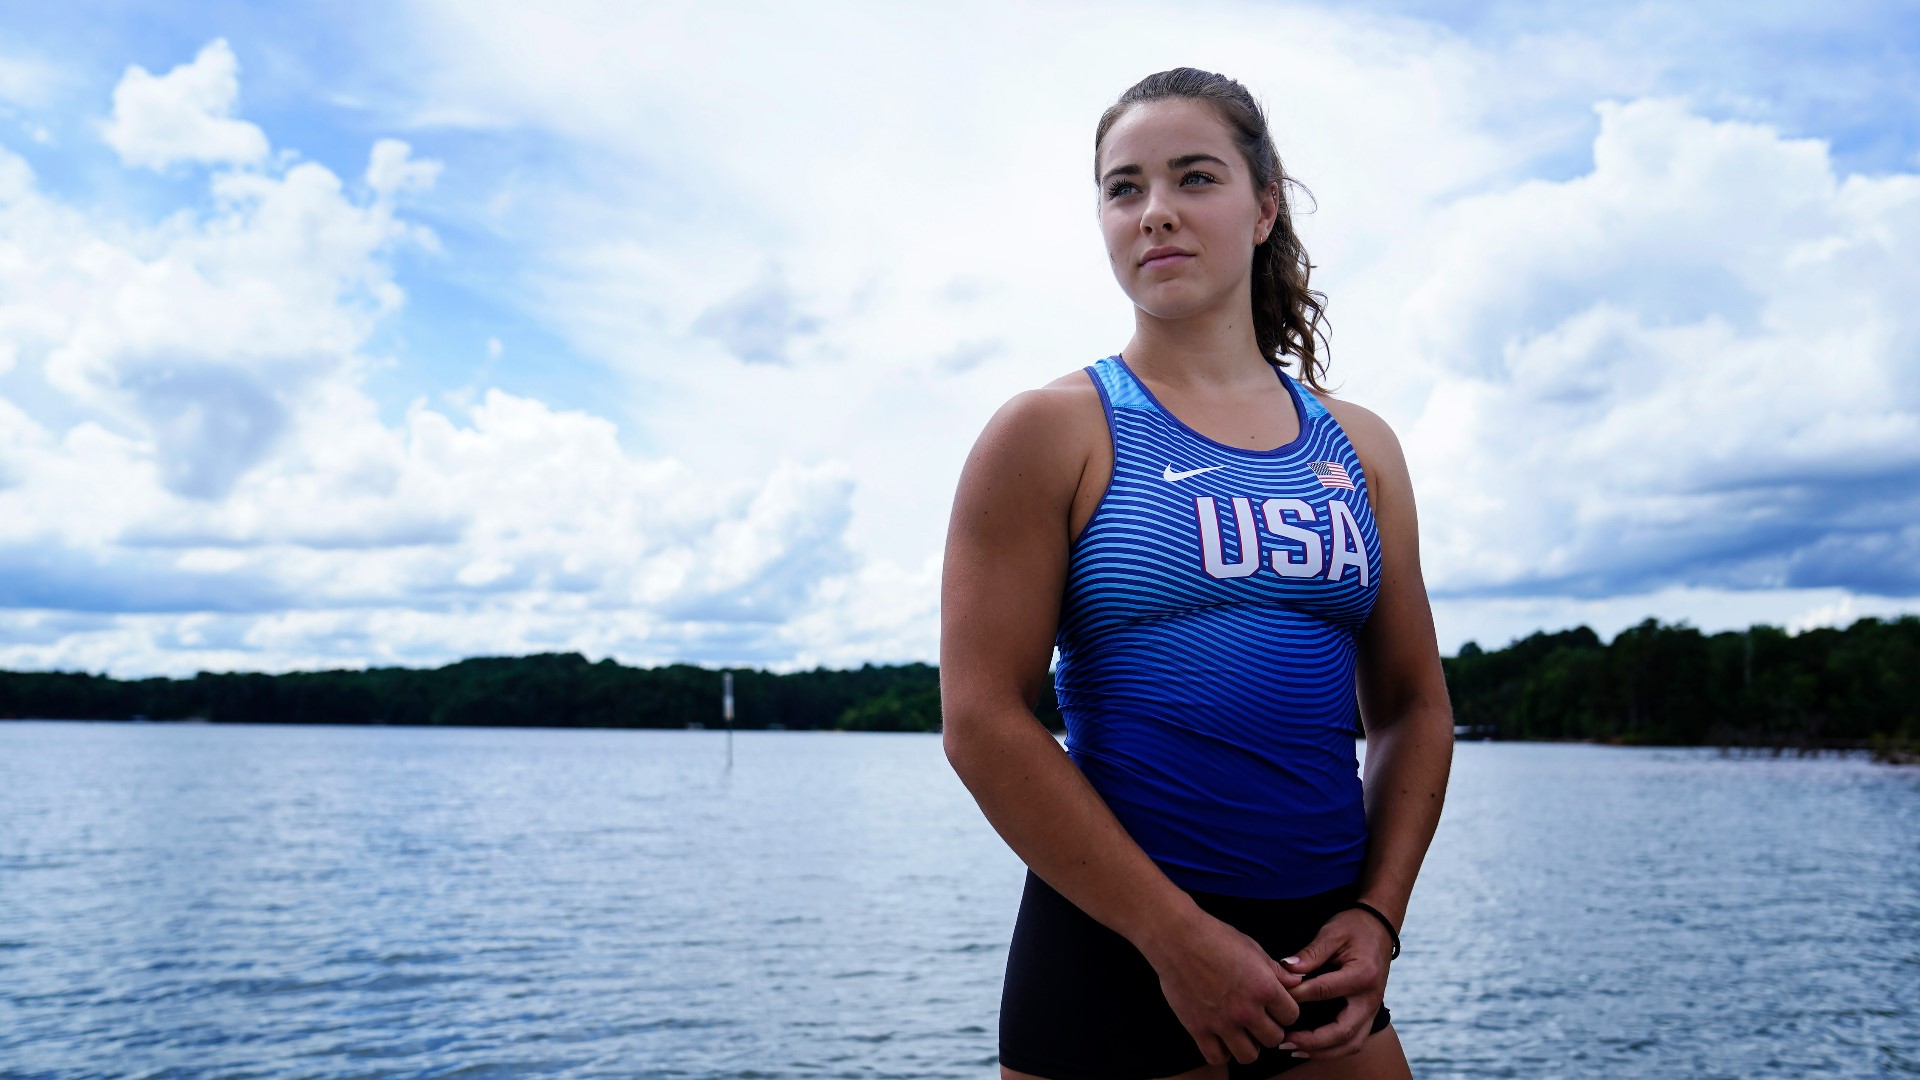 Lake Lanier was home base for her Olympic training in a relatively unknown – but extremely challenging sport: canoe sprint.